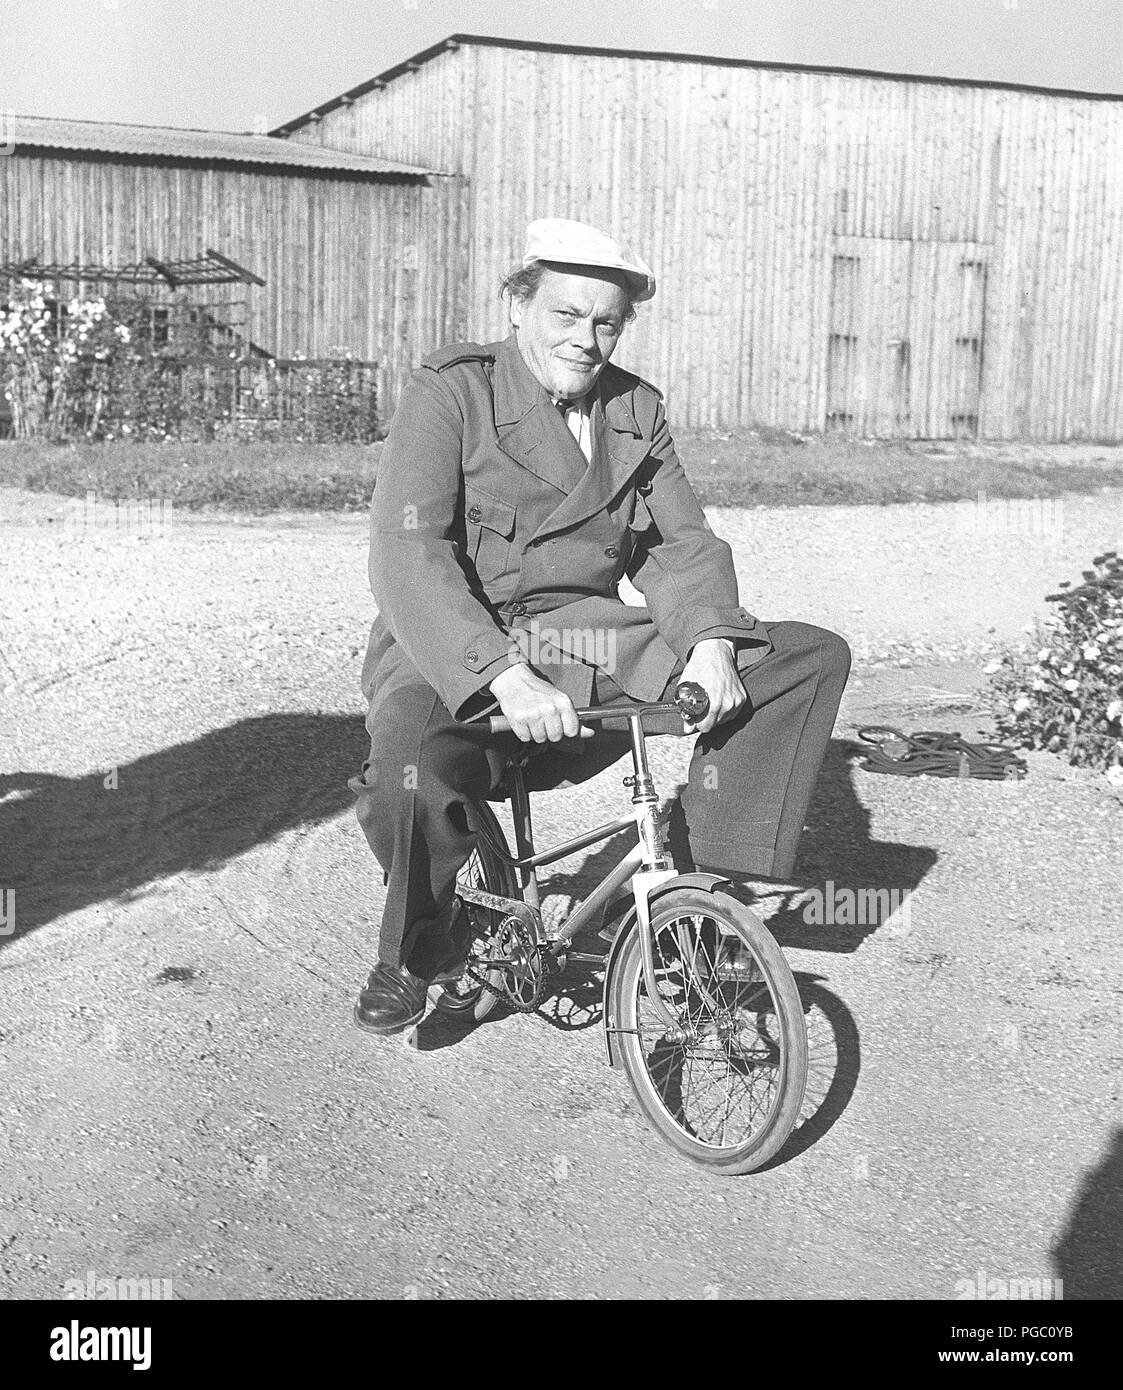 1950s man on a bicycle. Actor Hampe Faustman is riding a childrens bicycle. Sweden 1952  Photo Kristoffersson BD66-9 Stock Photo